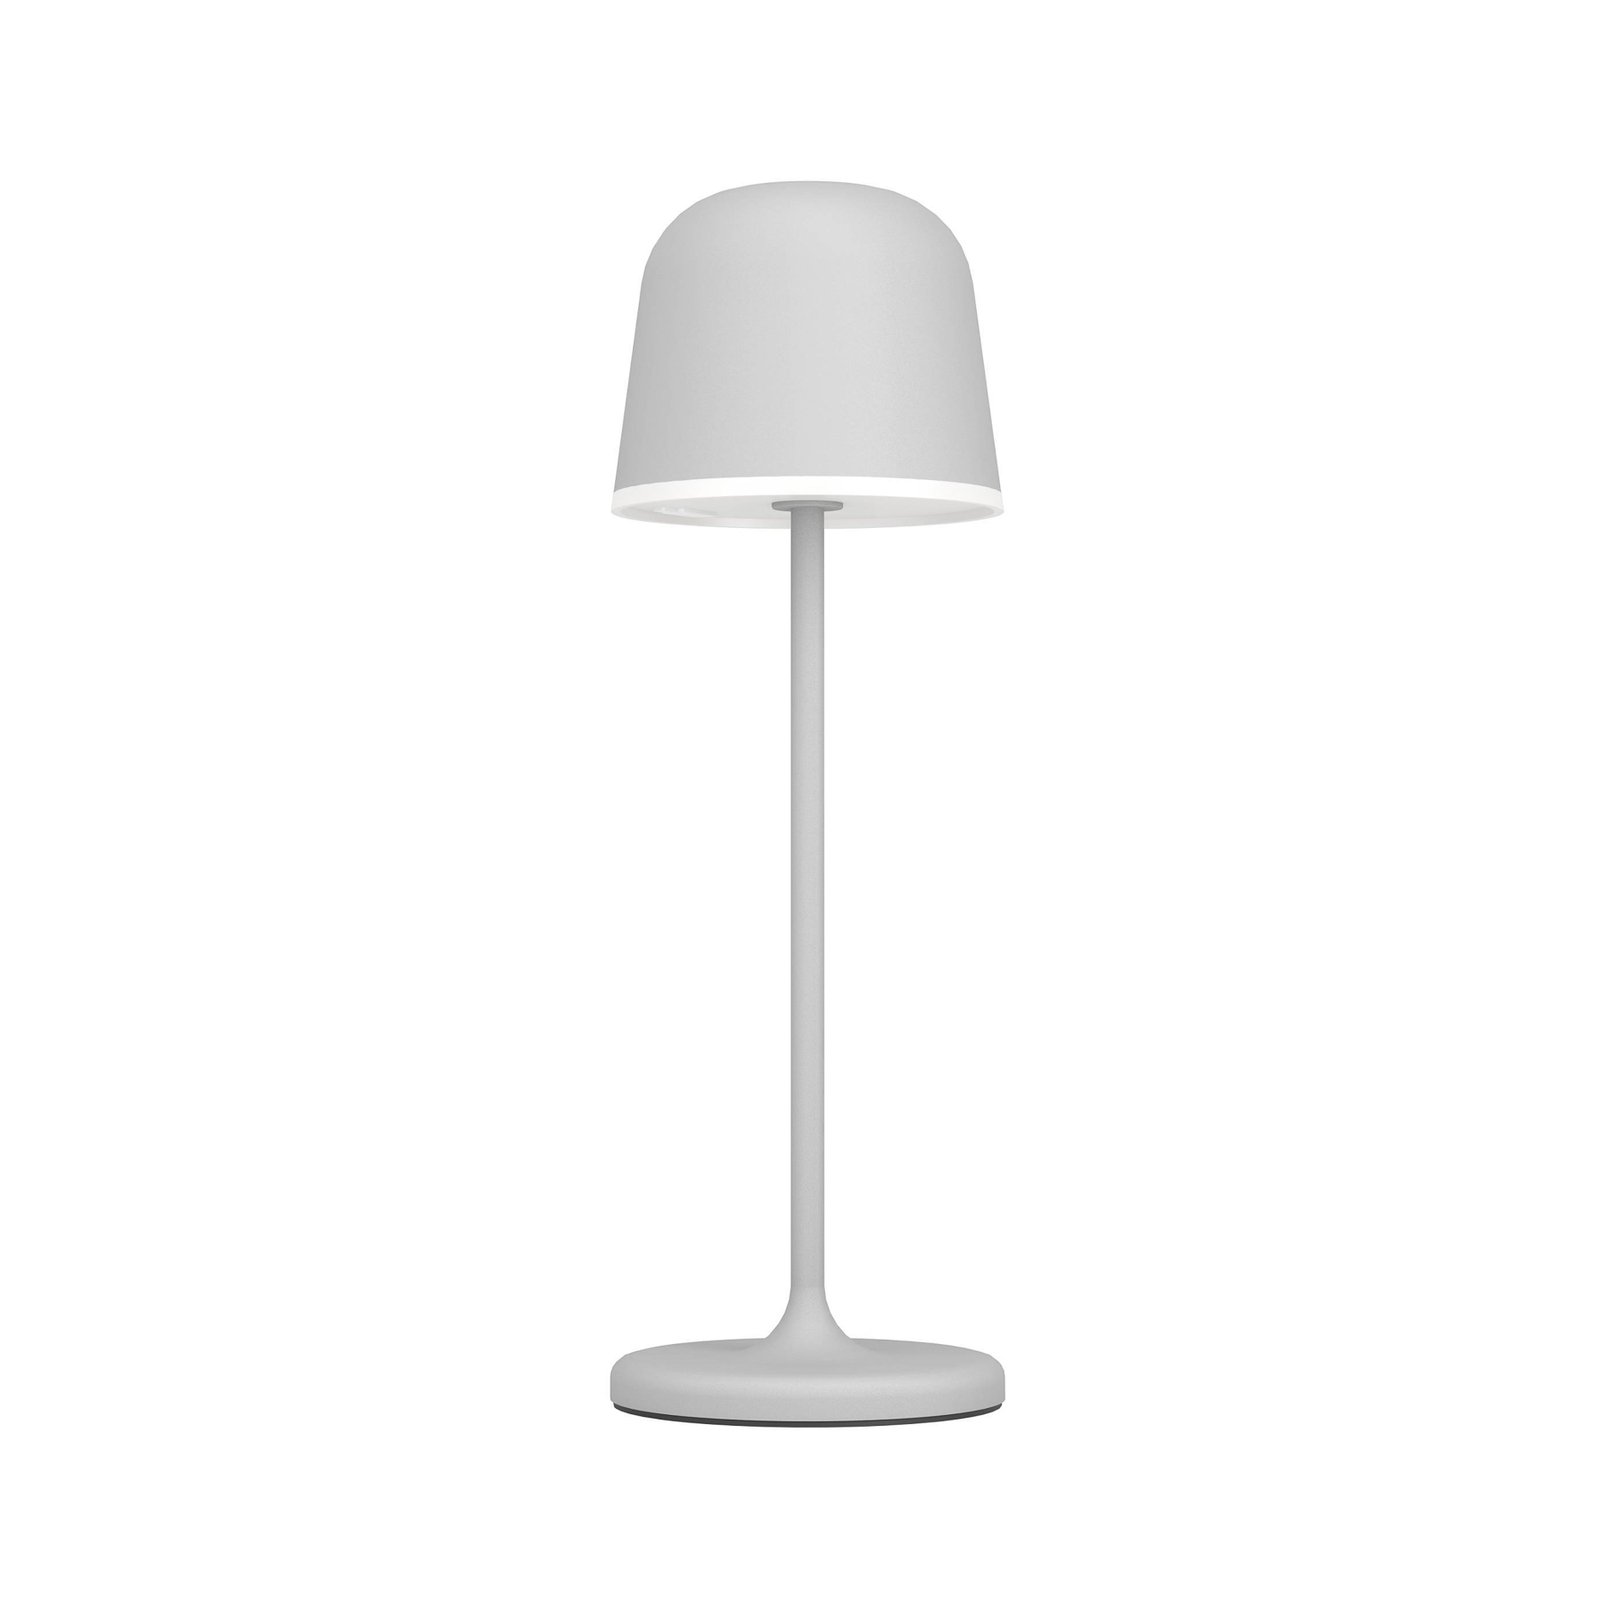 Mannera LED table lamp with a battery, grey